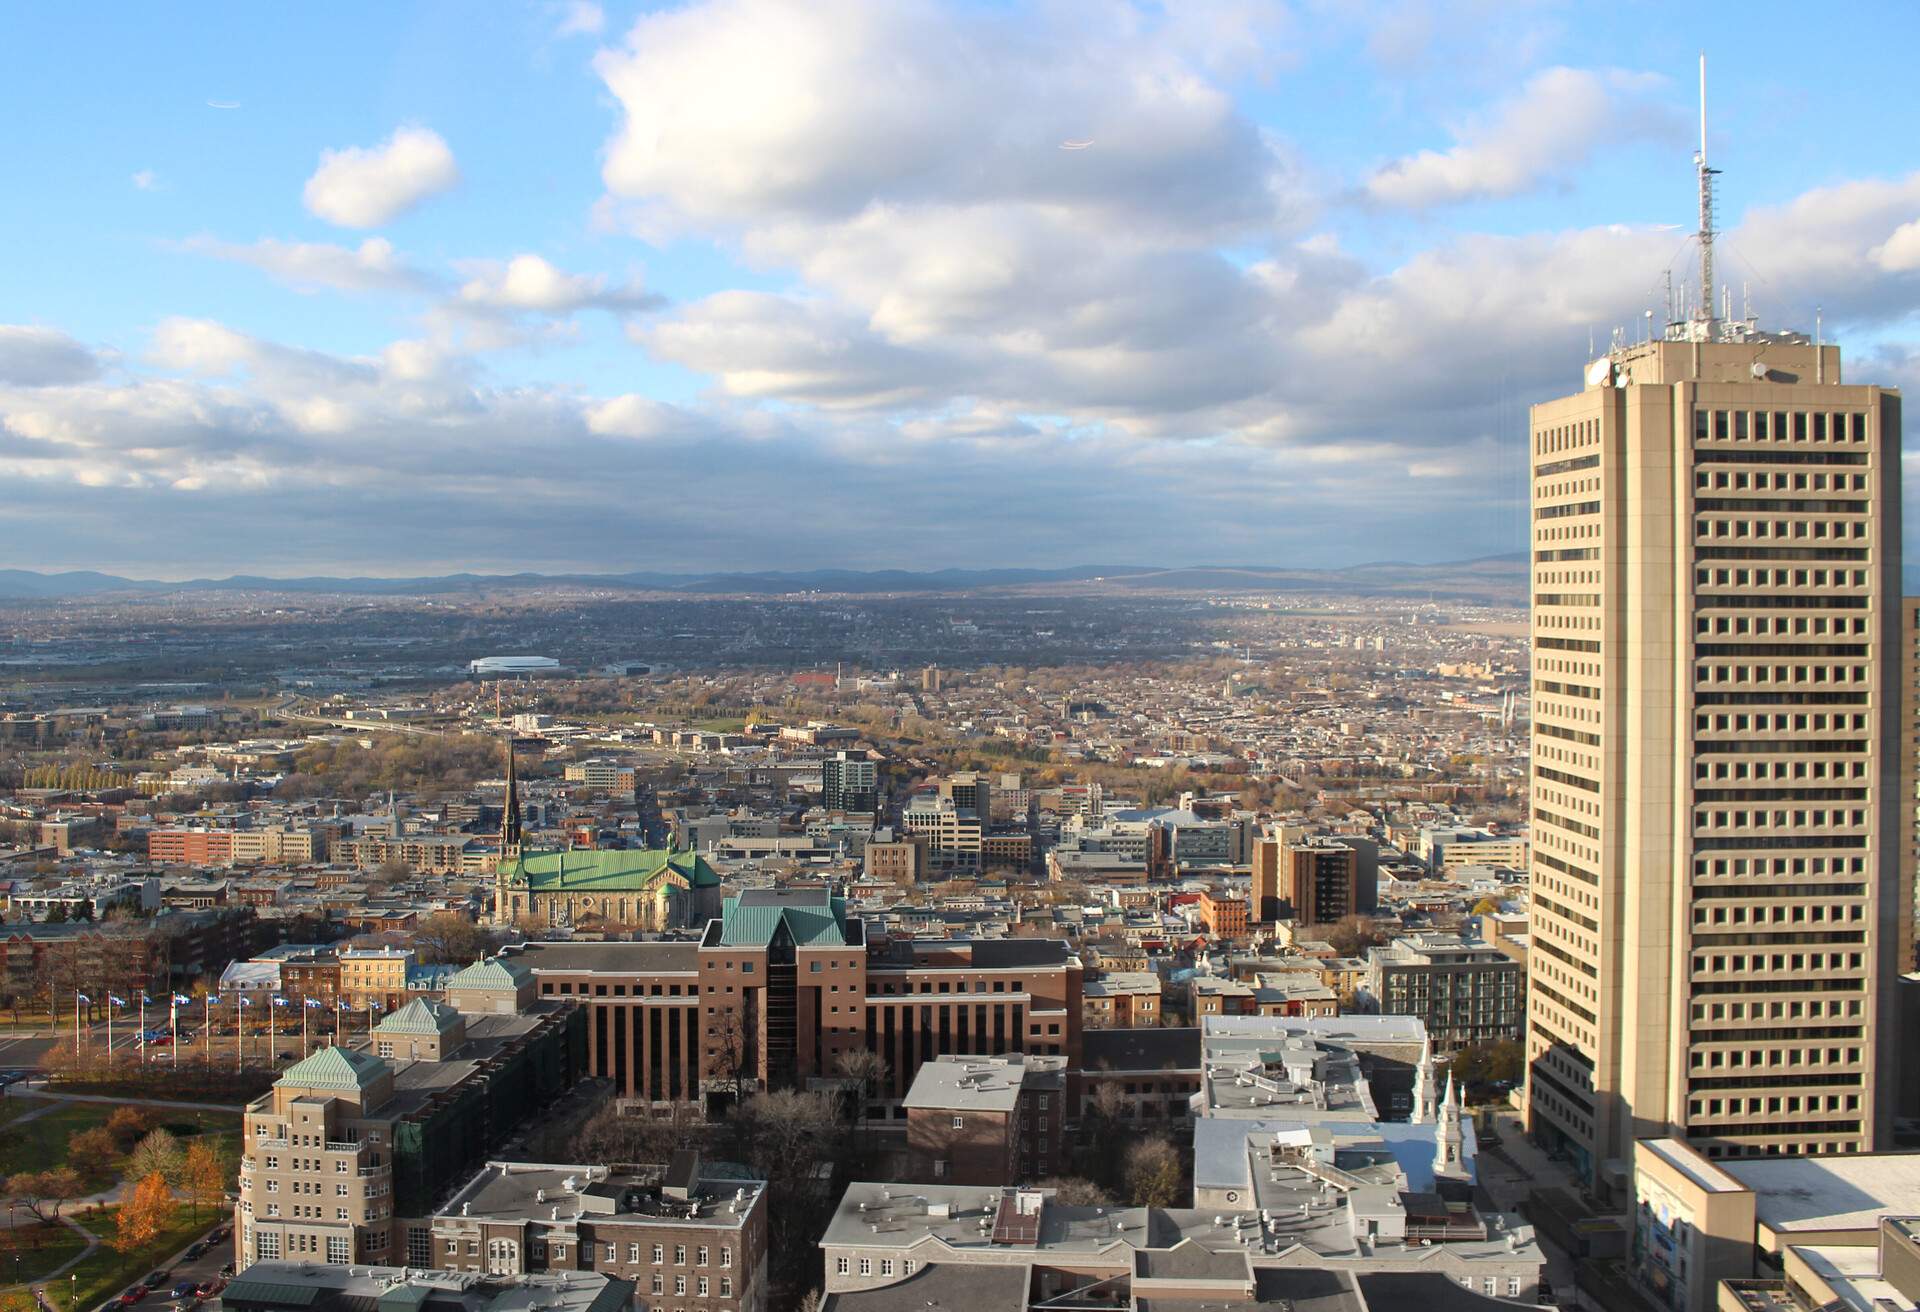 View looking north in Quebec City, Canada, toward the Édifice Marie-Guyart. Previously known as Complexe G, this 31-storey brutalist skyscraper is the tallest building in the city, and the tallest building in Canada east of Montreal. Situated on Parliament Hill, the building houses government offices and the Observatoire de la Capitale observation deck. In the background are Saint-Jean-Baptiste Catholic Church and the Videotron Centre arena, inaugurated in 2015.